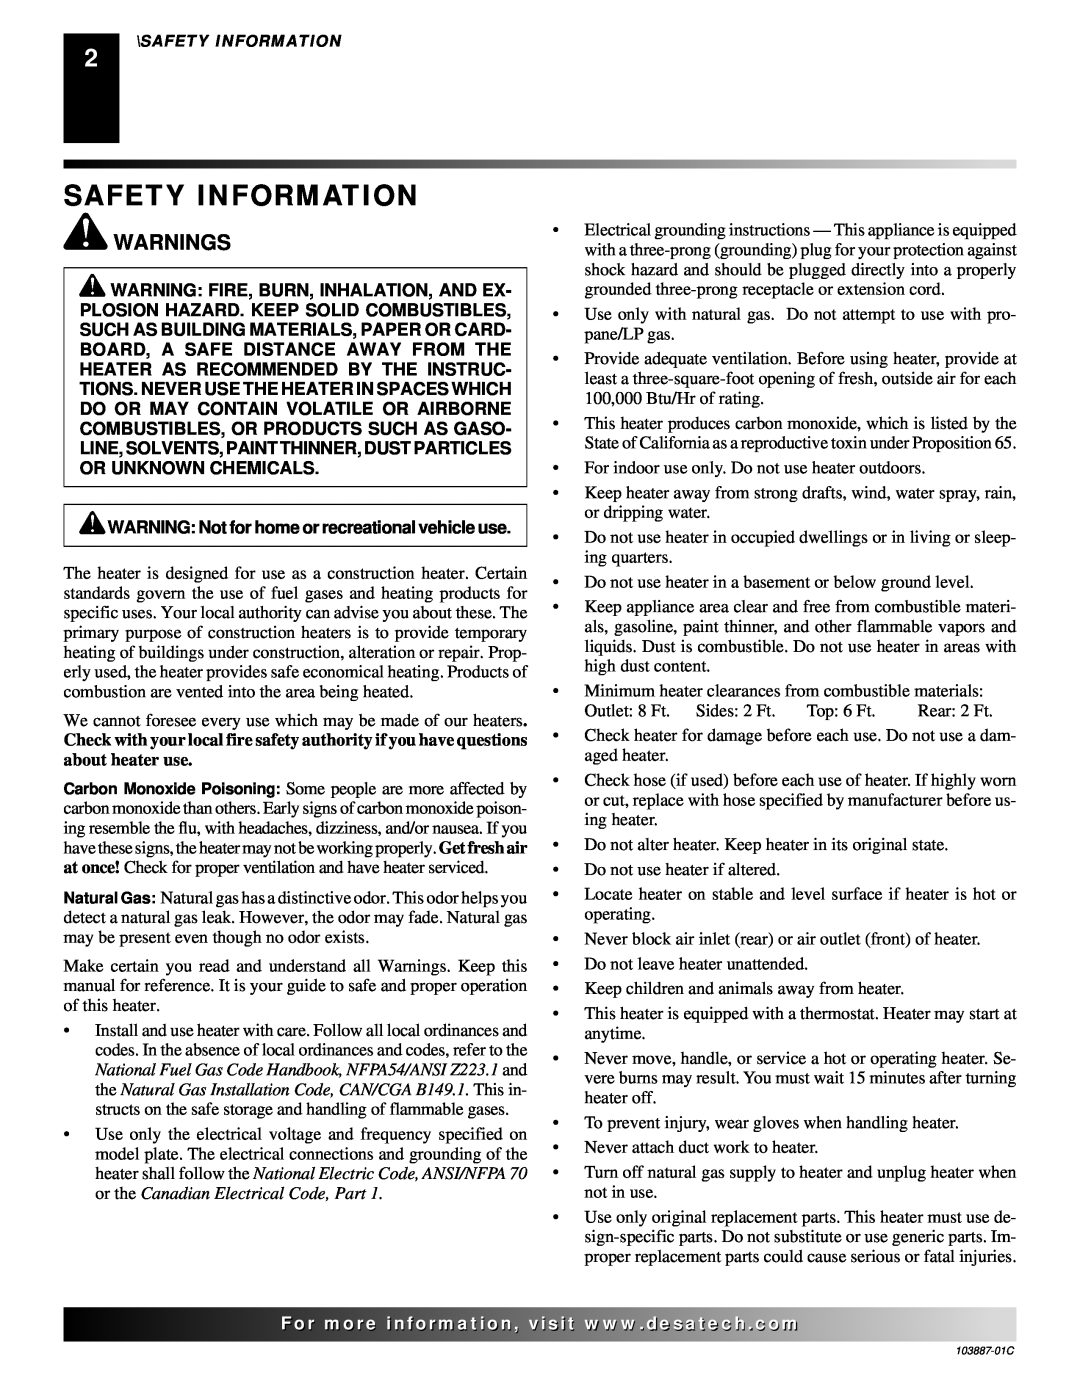 Desa BNG150T owner manual Safety Information, Warnings, WARNING Not for home or recreational vehicle use 